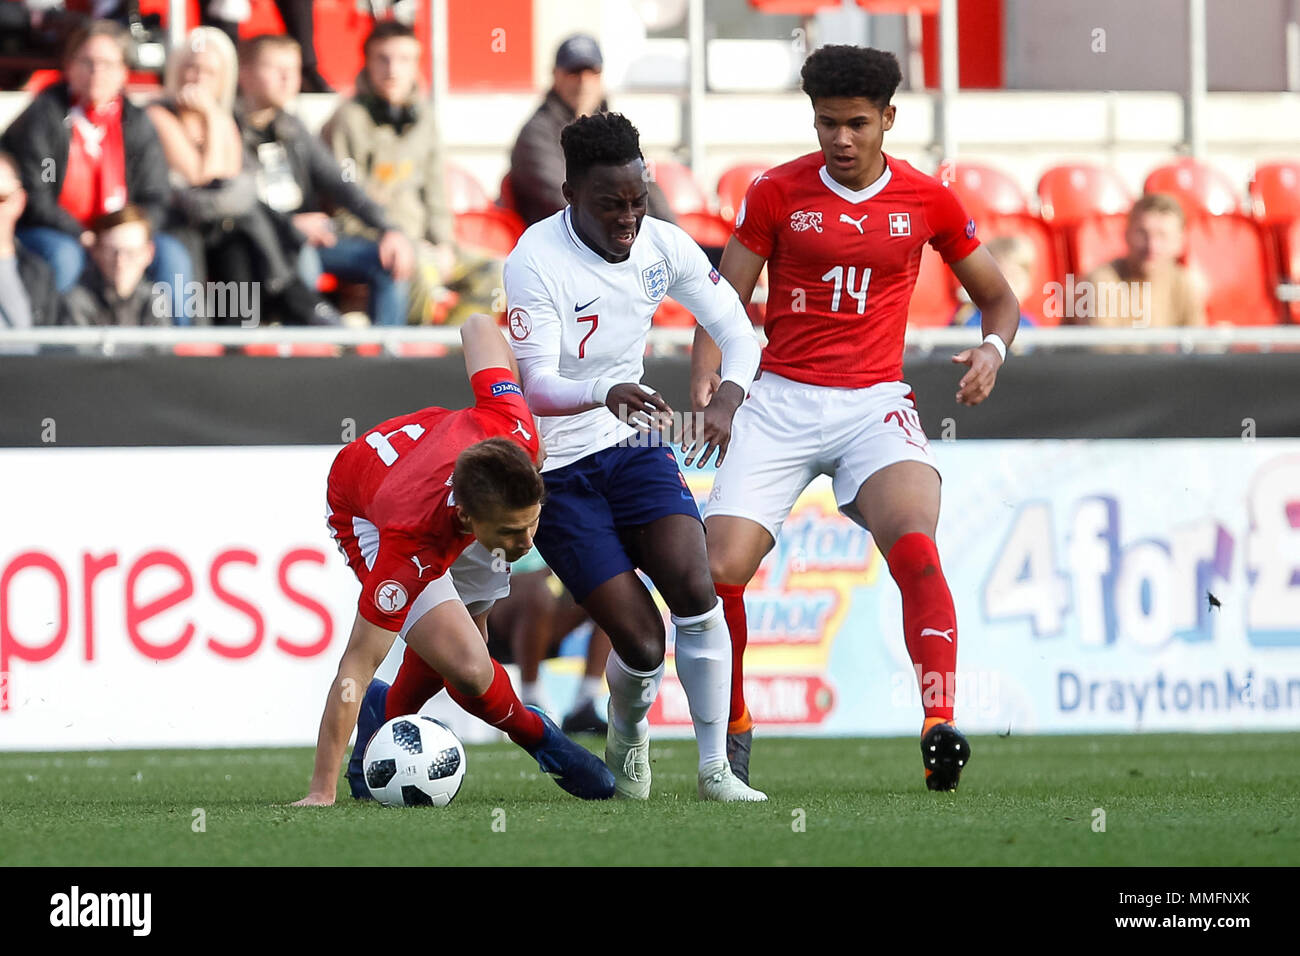 Ilan Sauter of Switzerland, Arvin Appiah of England and Simon Sohm of Switzerland during the 2018 UEFA European Under-17 Championship Group A match between Switzerland and England at New York Stadium on May 10th 2018 in Rotherham, England. (Photo by Daniel Chesterton/phcimages.com) Stock Photo